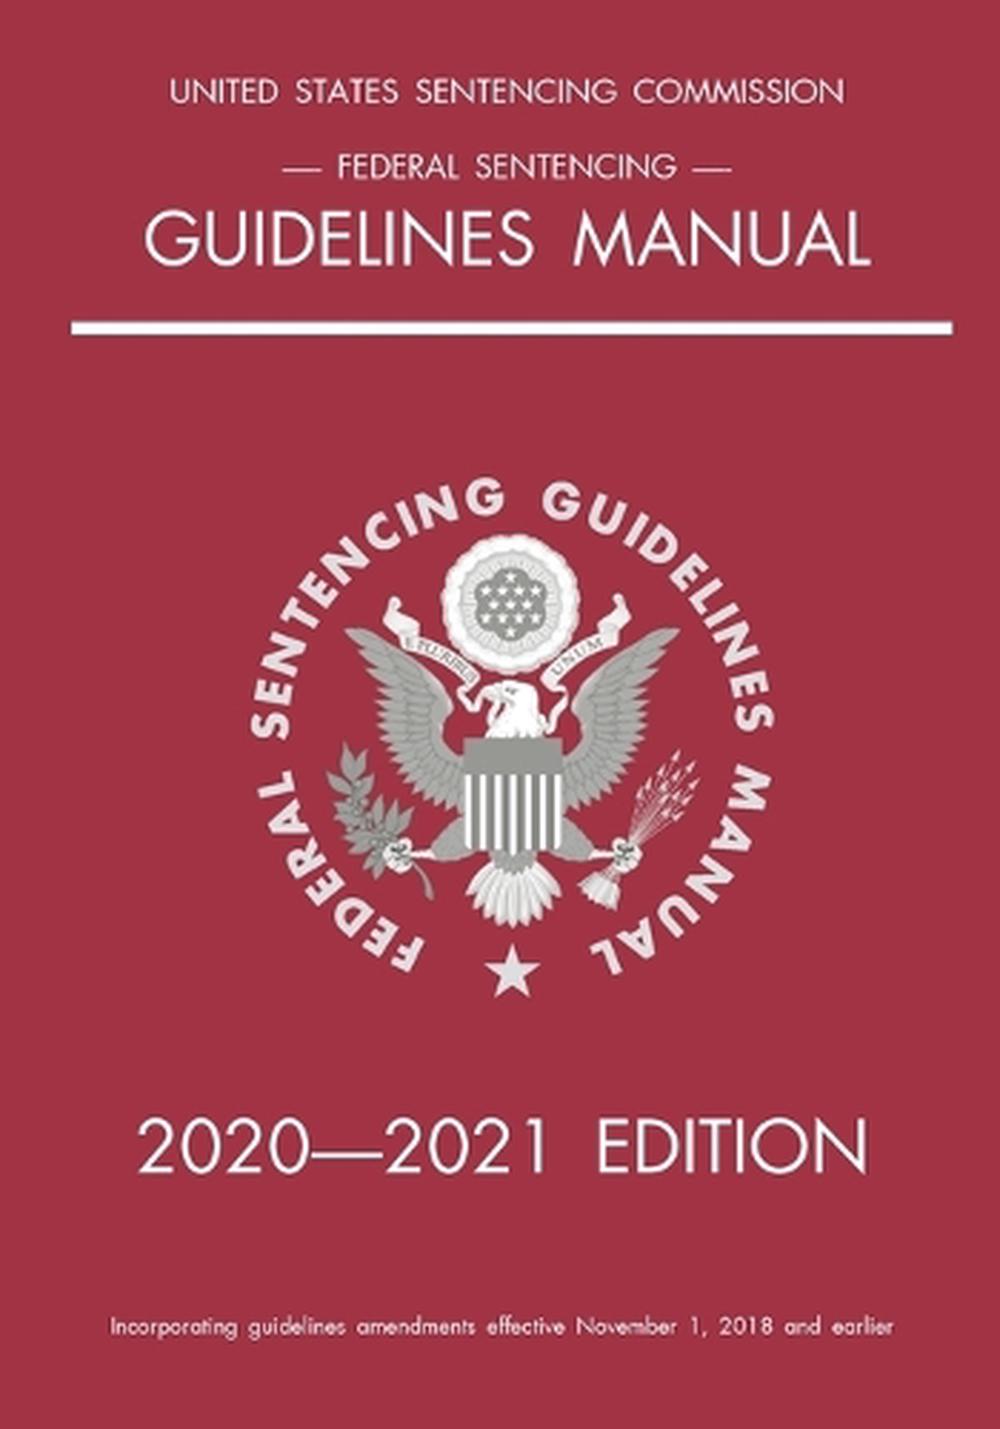 federal-sentencing-guidelines-manual-2020-2021-edition-with-inside-cover-quick-9781640020931